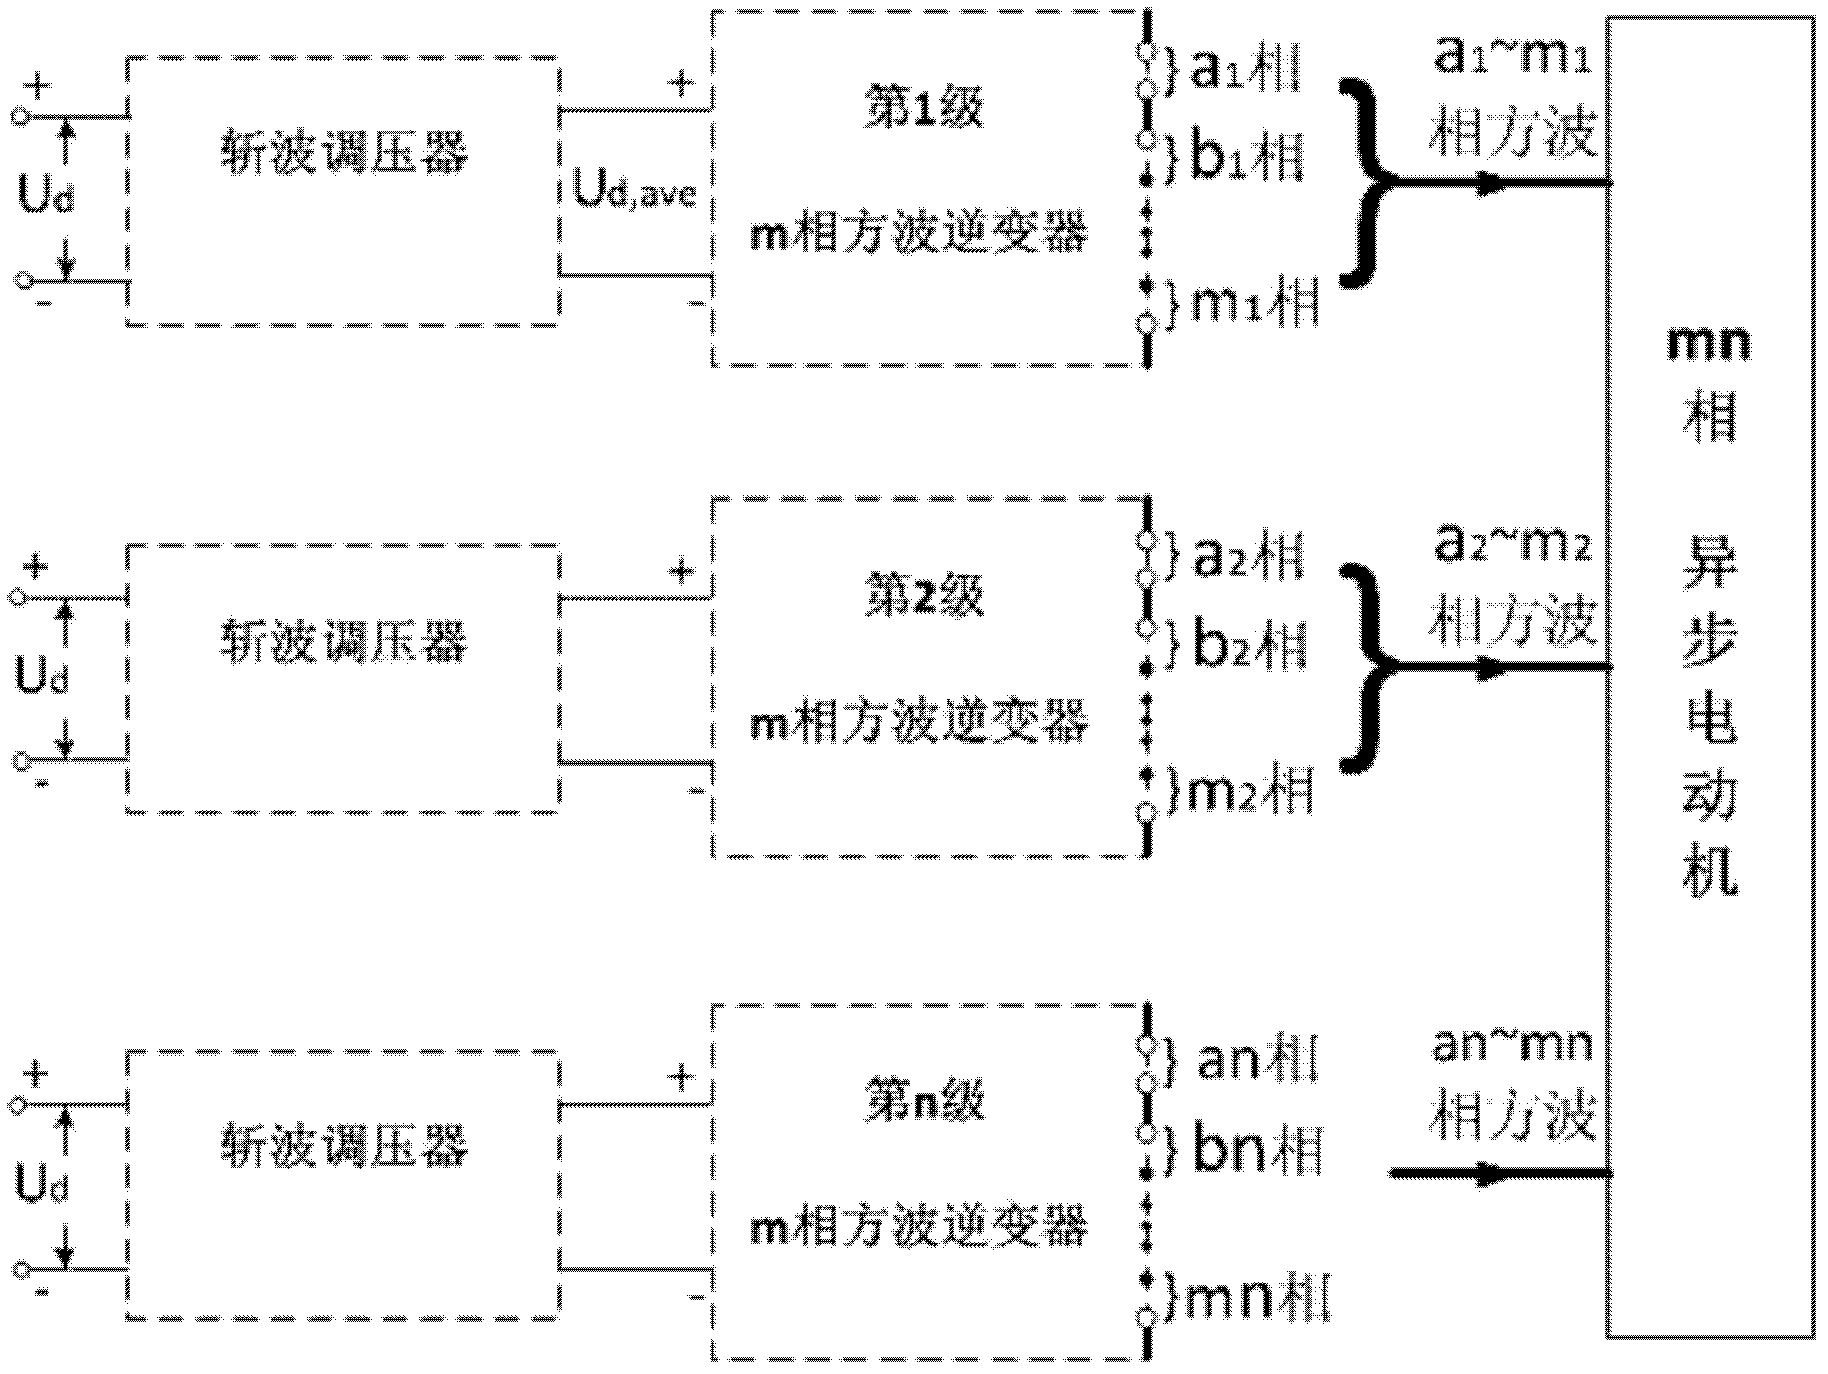 Multiphase square wave inverter realizing commutation by utilizing insulated gate bipolar transistors (IGBT) and consisting of thyristors